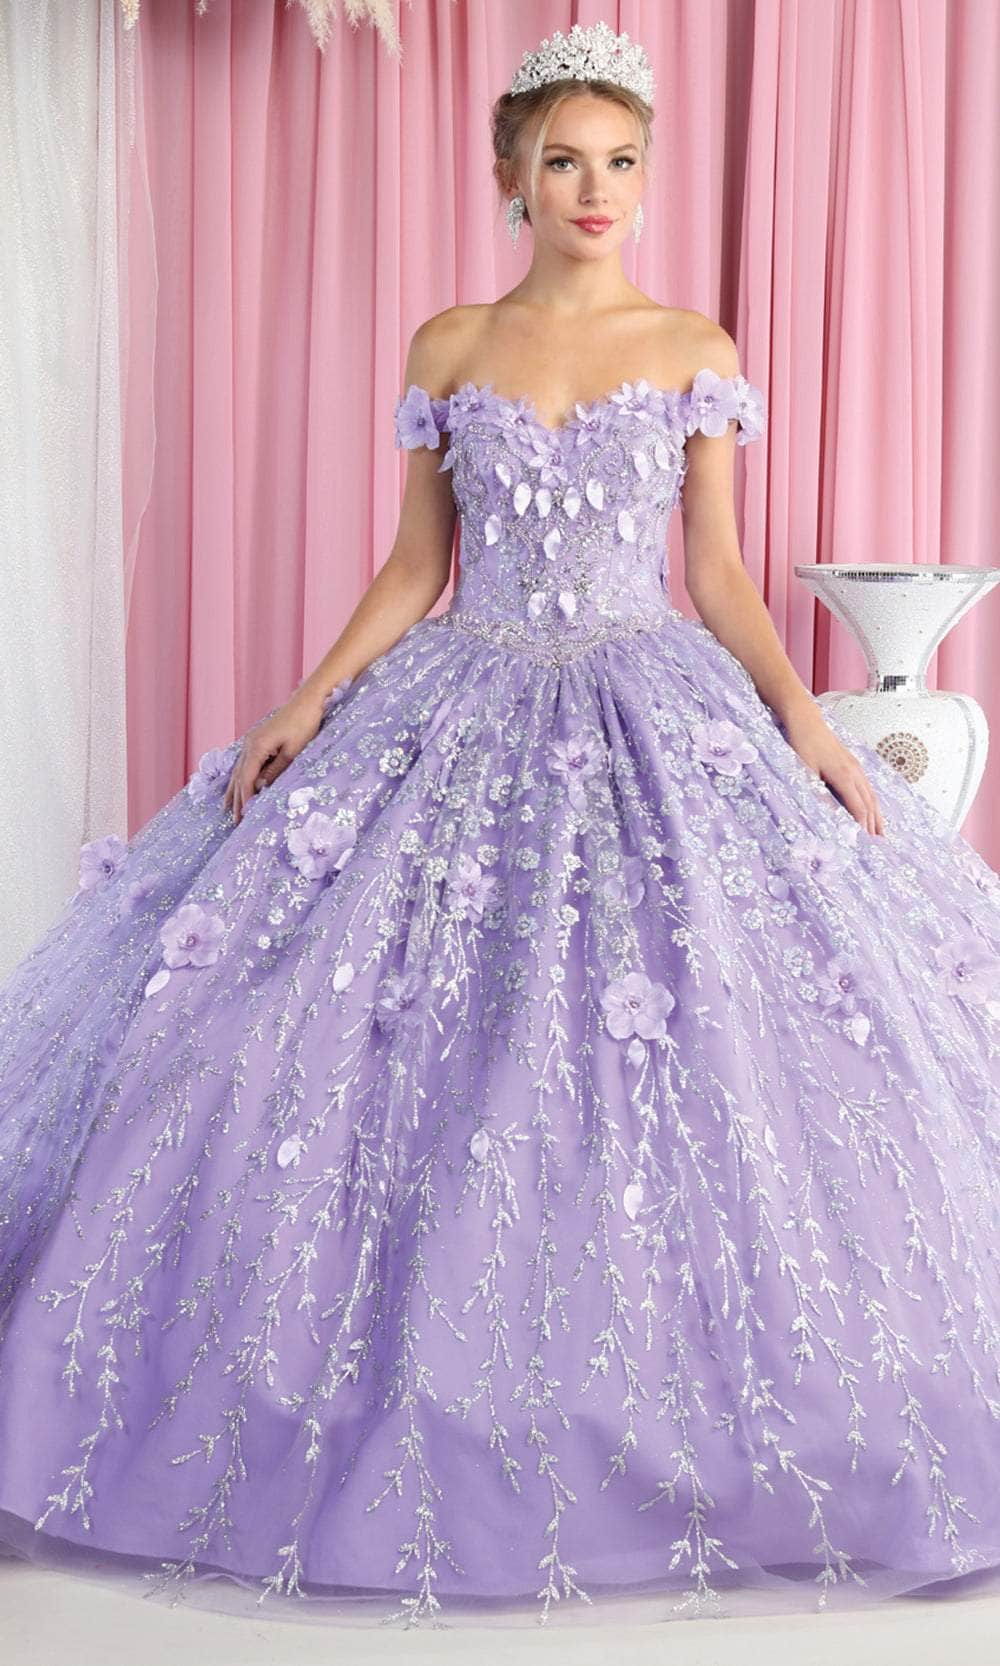 Image of May Queen LK192 - Off Shoulder Floral Quinceanera Gown